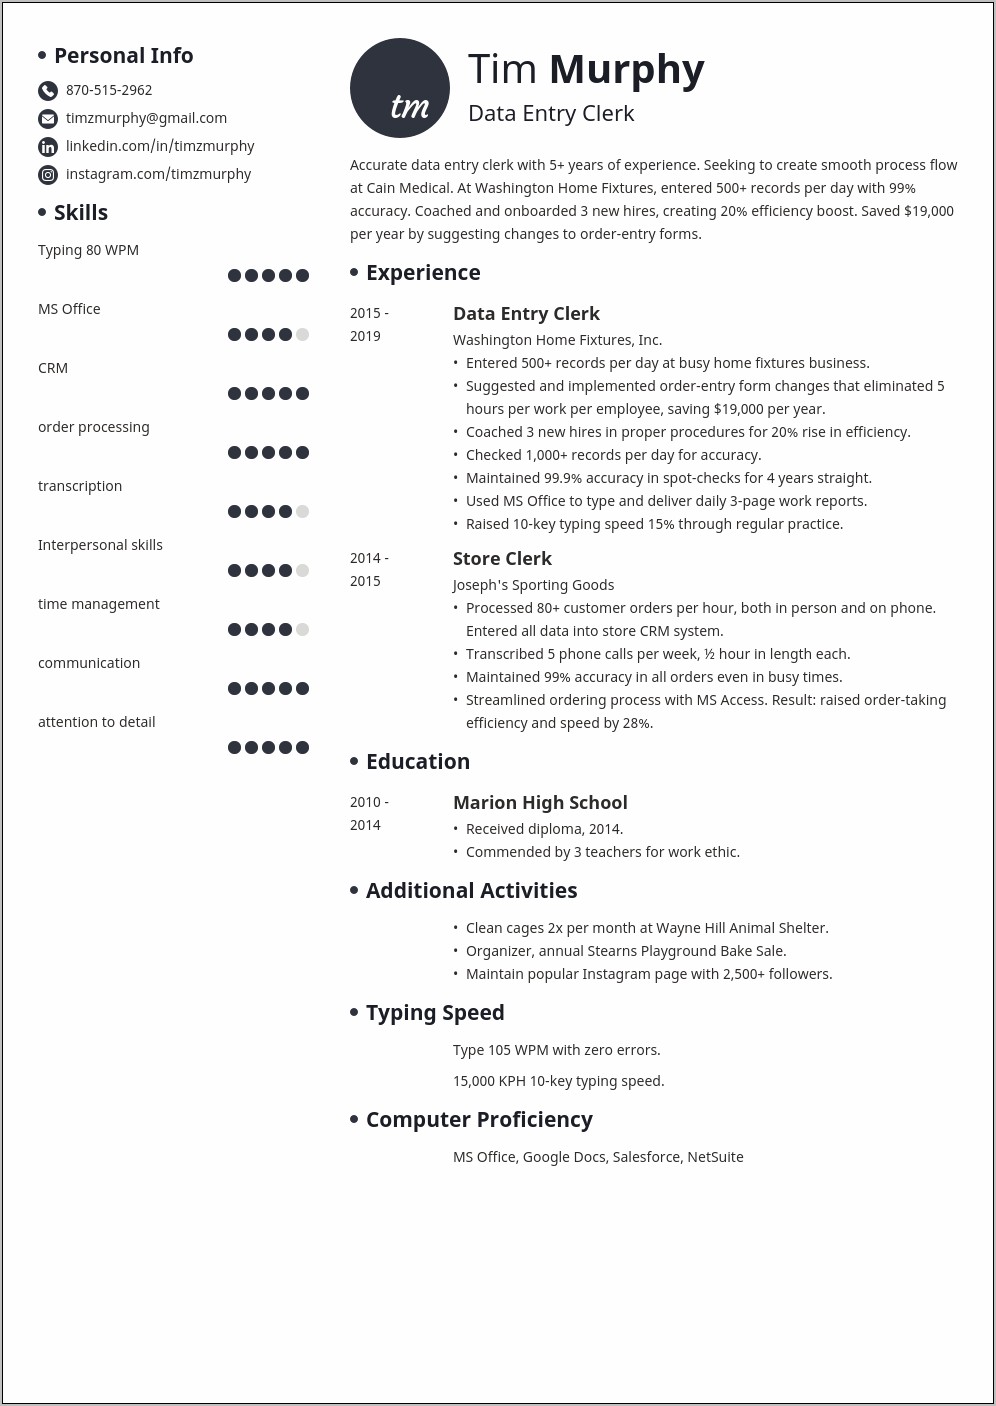 Basic Data Entry Specialist Resume Example Template